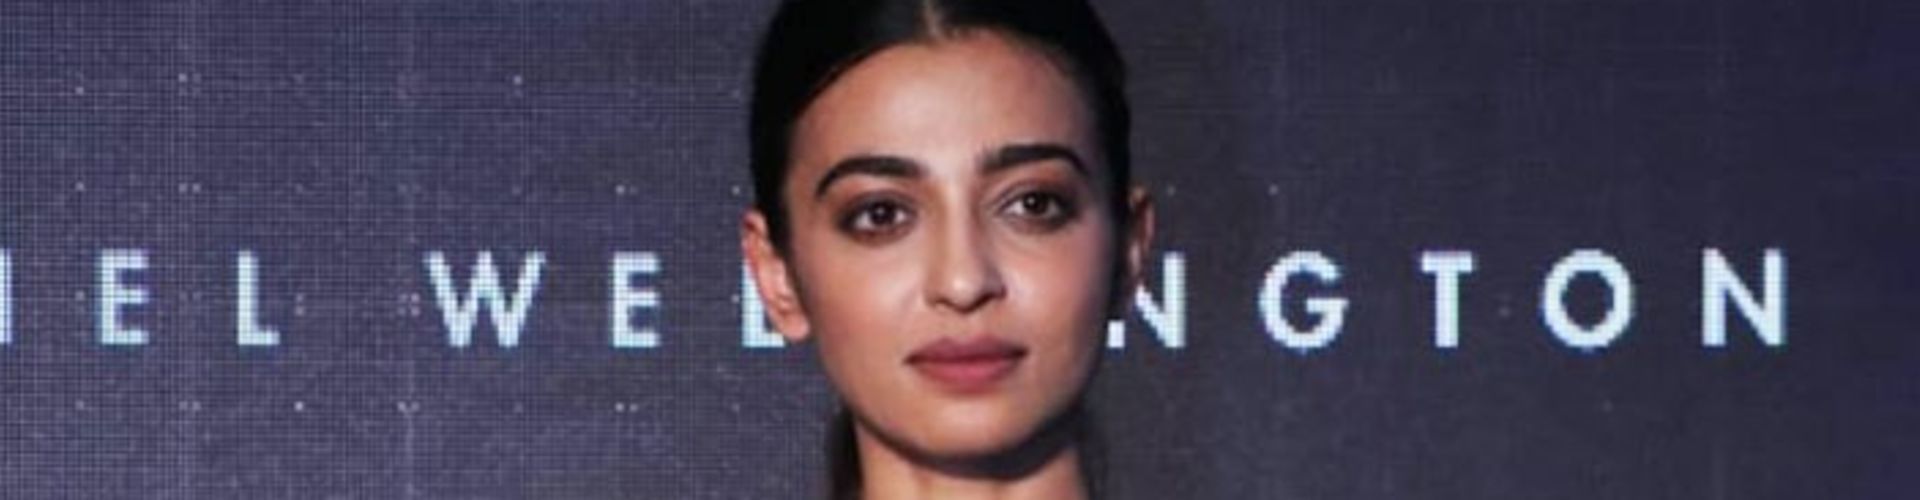 Hope industry comes up with an equal and genderless constructive system says, Radhika Apte